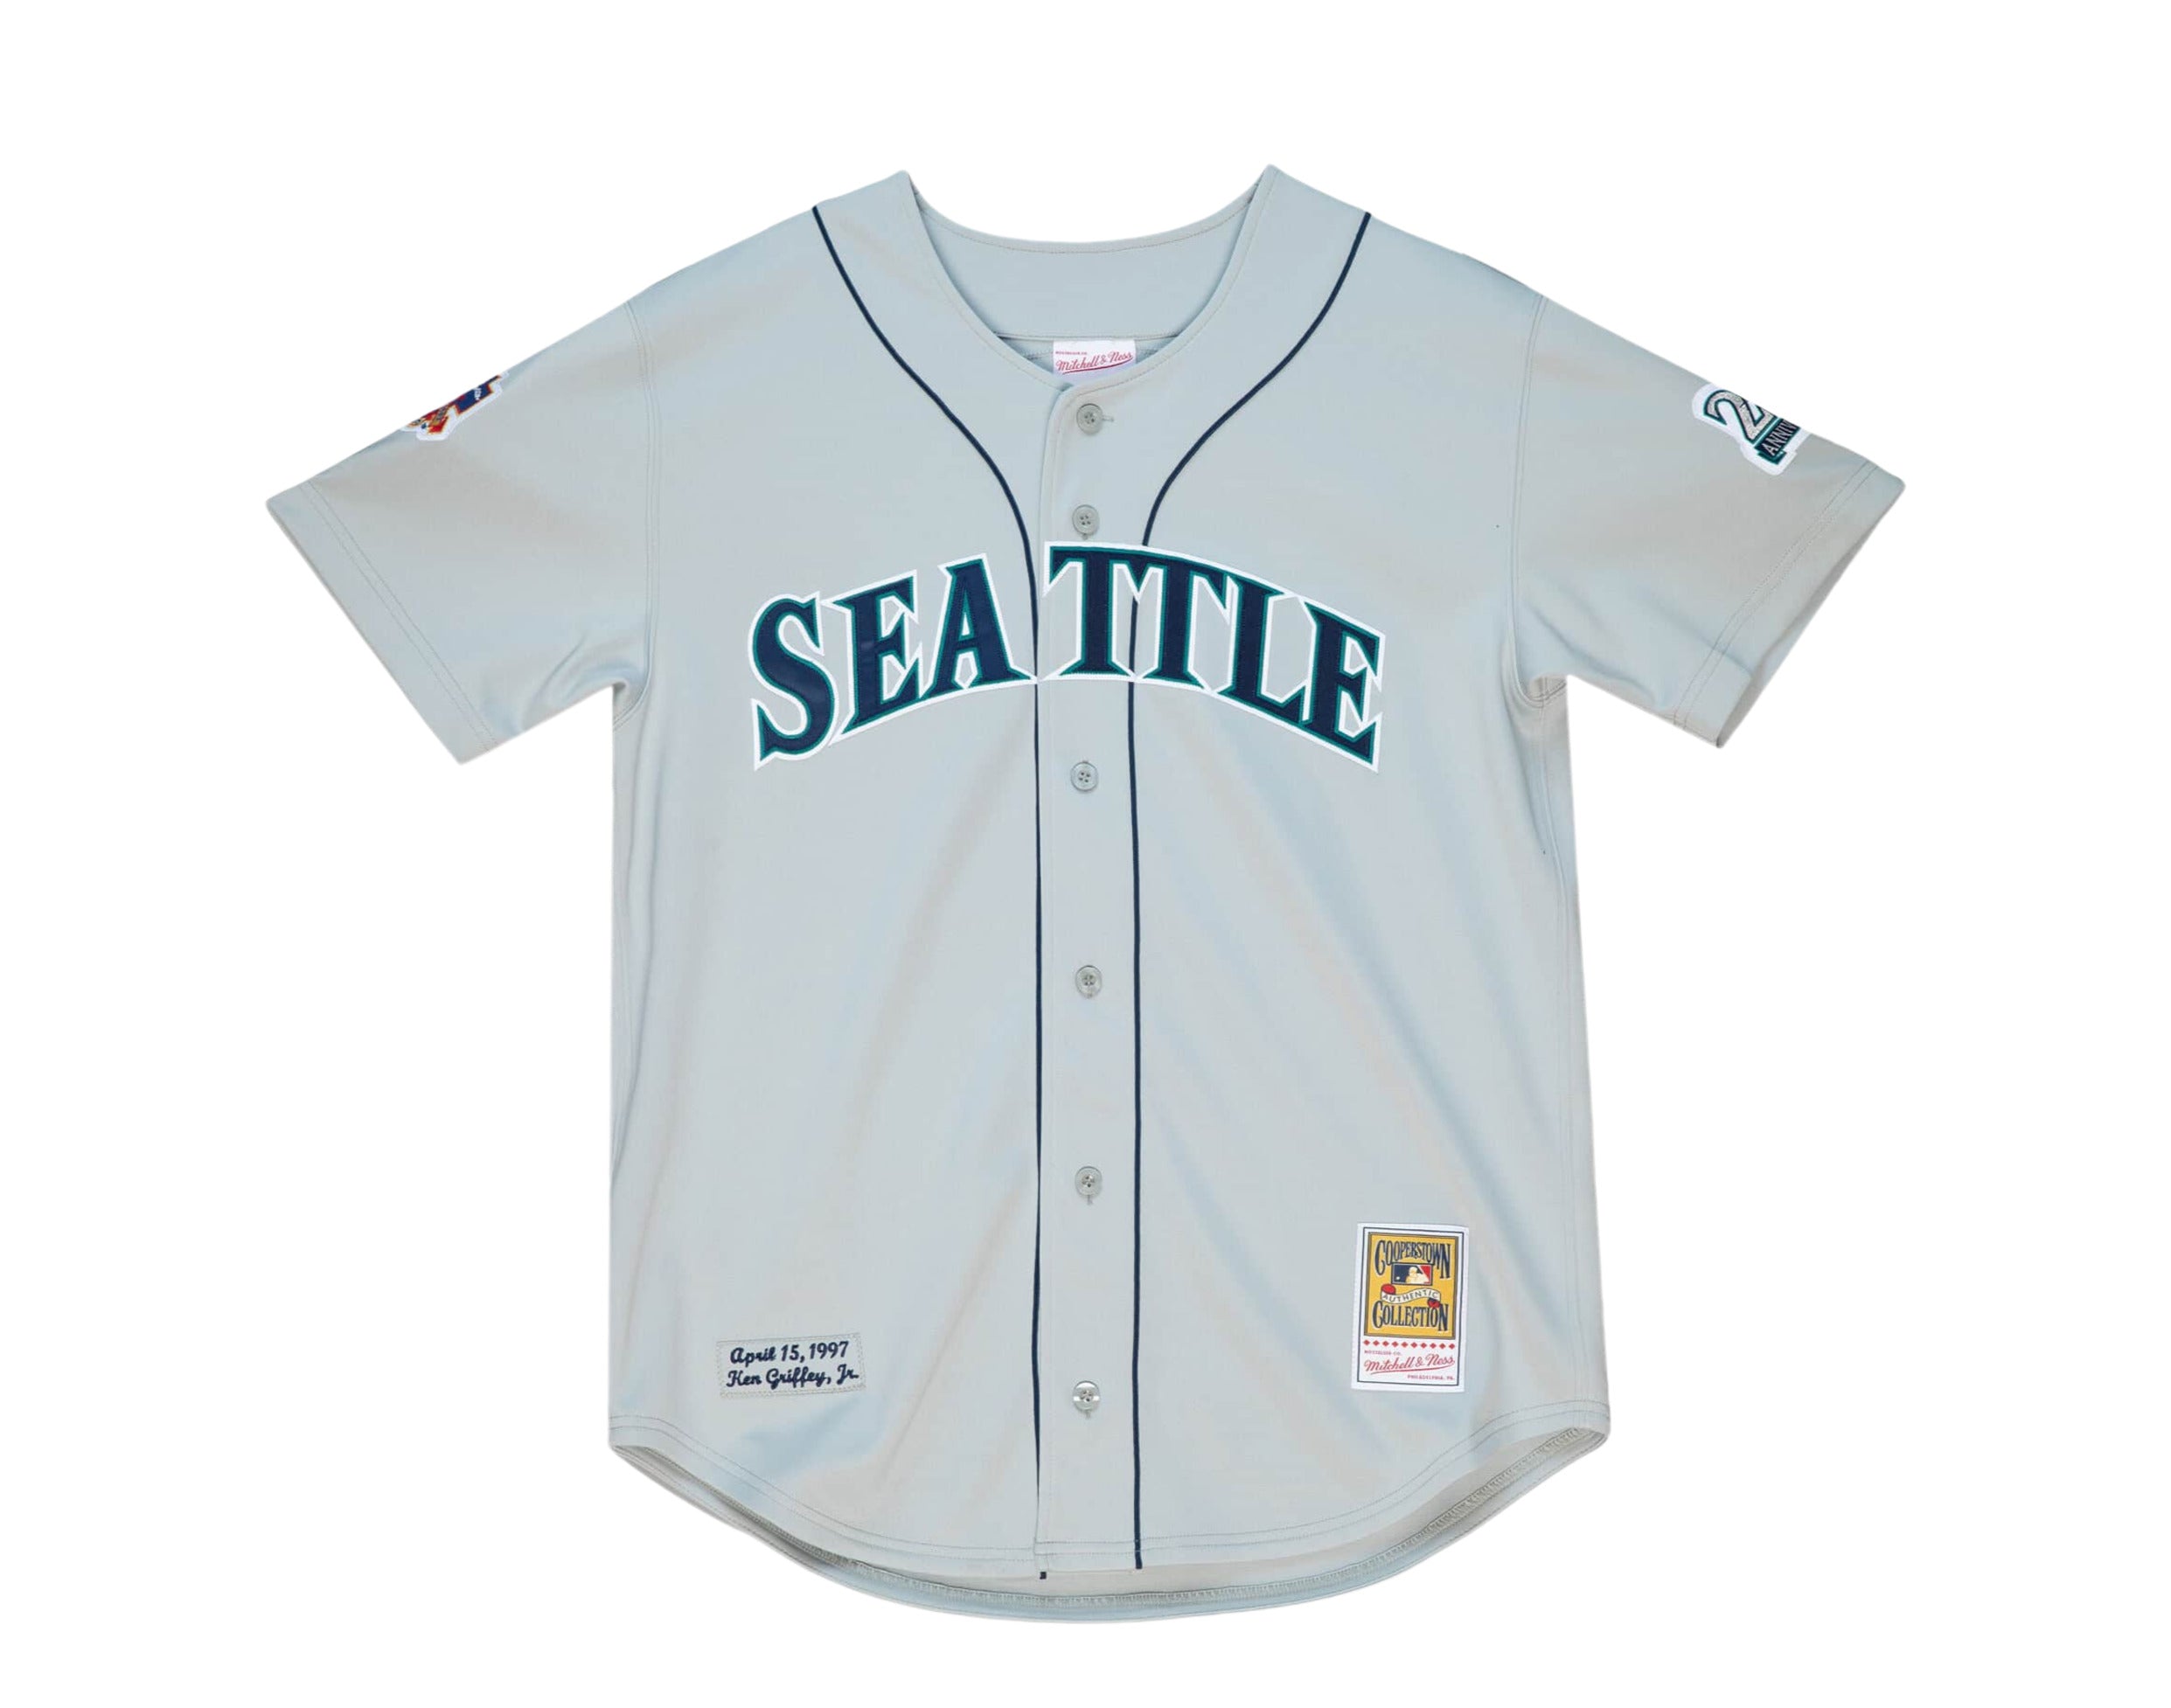 Men's Mitchell & Ness Ken Griffey Jr. Light Blue Seattle Mariners Cooperstown Collection Authentic Jersey